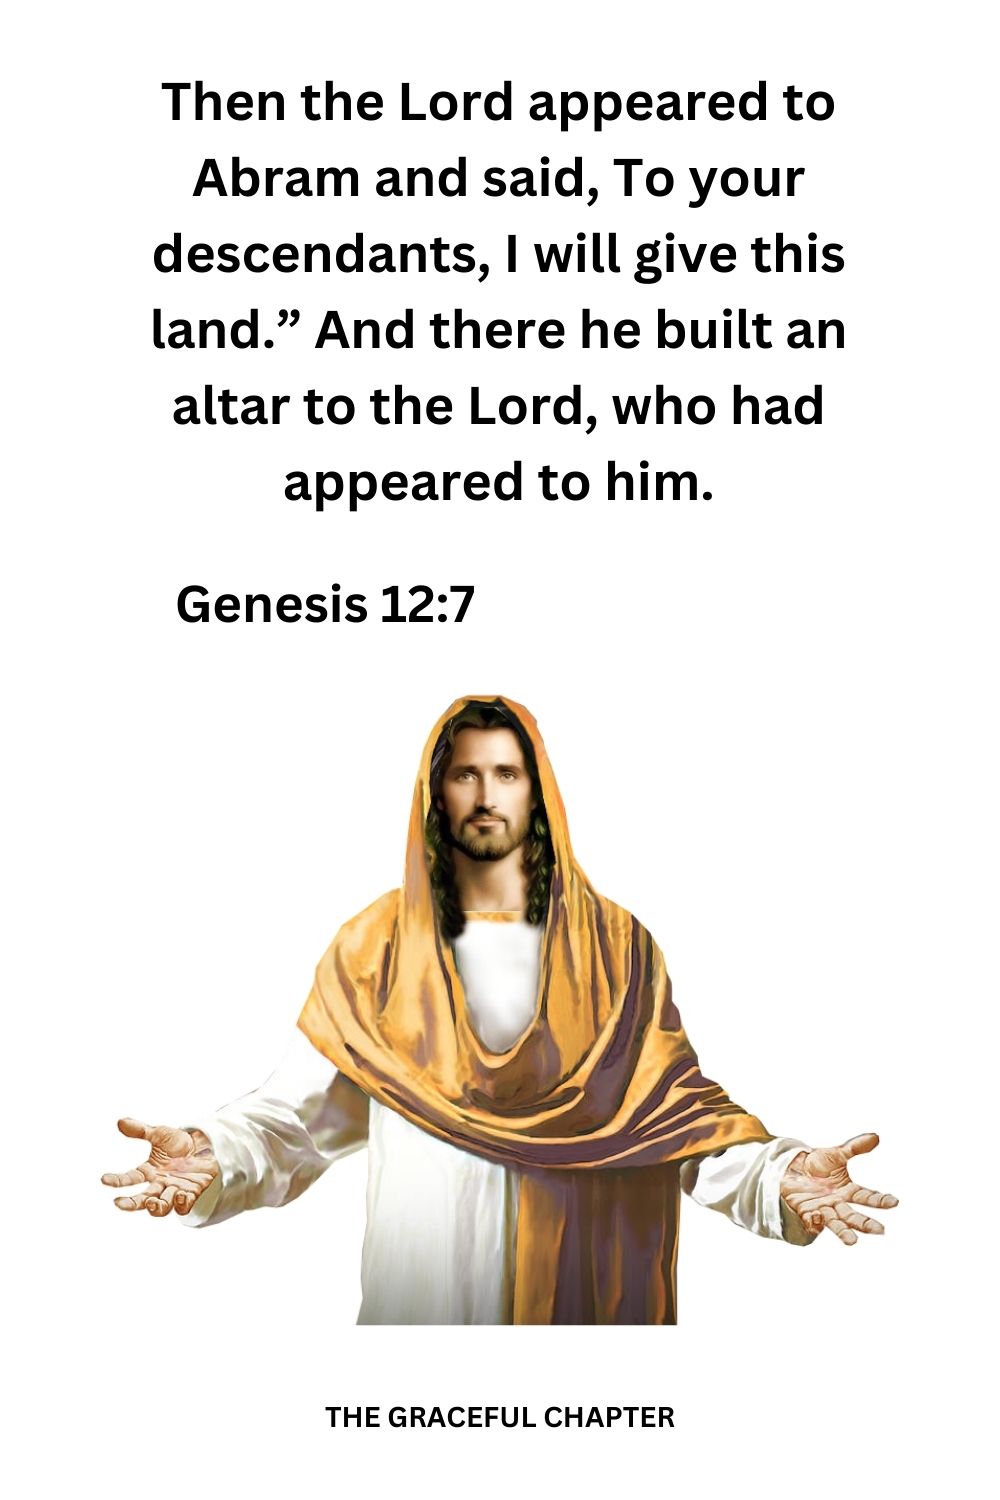 Then the Lord appeared to Abram and said, To your descendants, I will give this land.” And there he built an altar to the Lord, who had appeared to him. Genesis 12:7